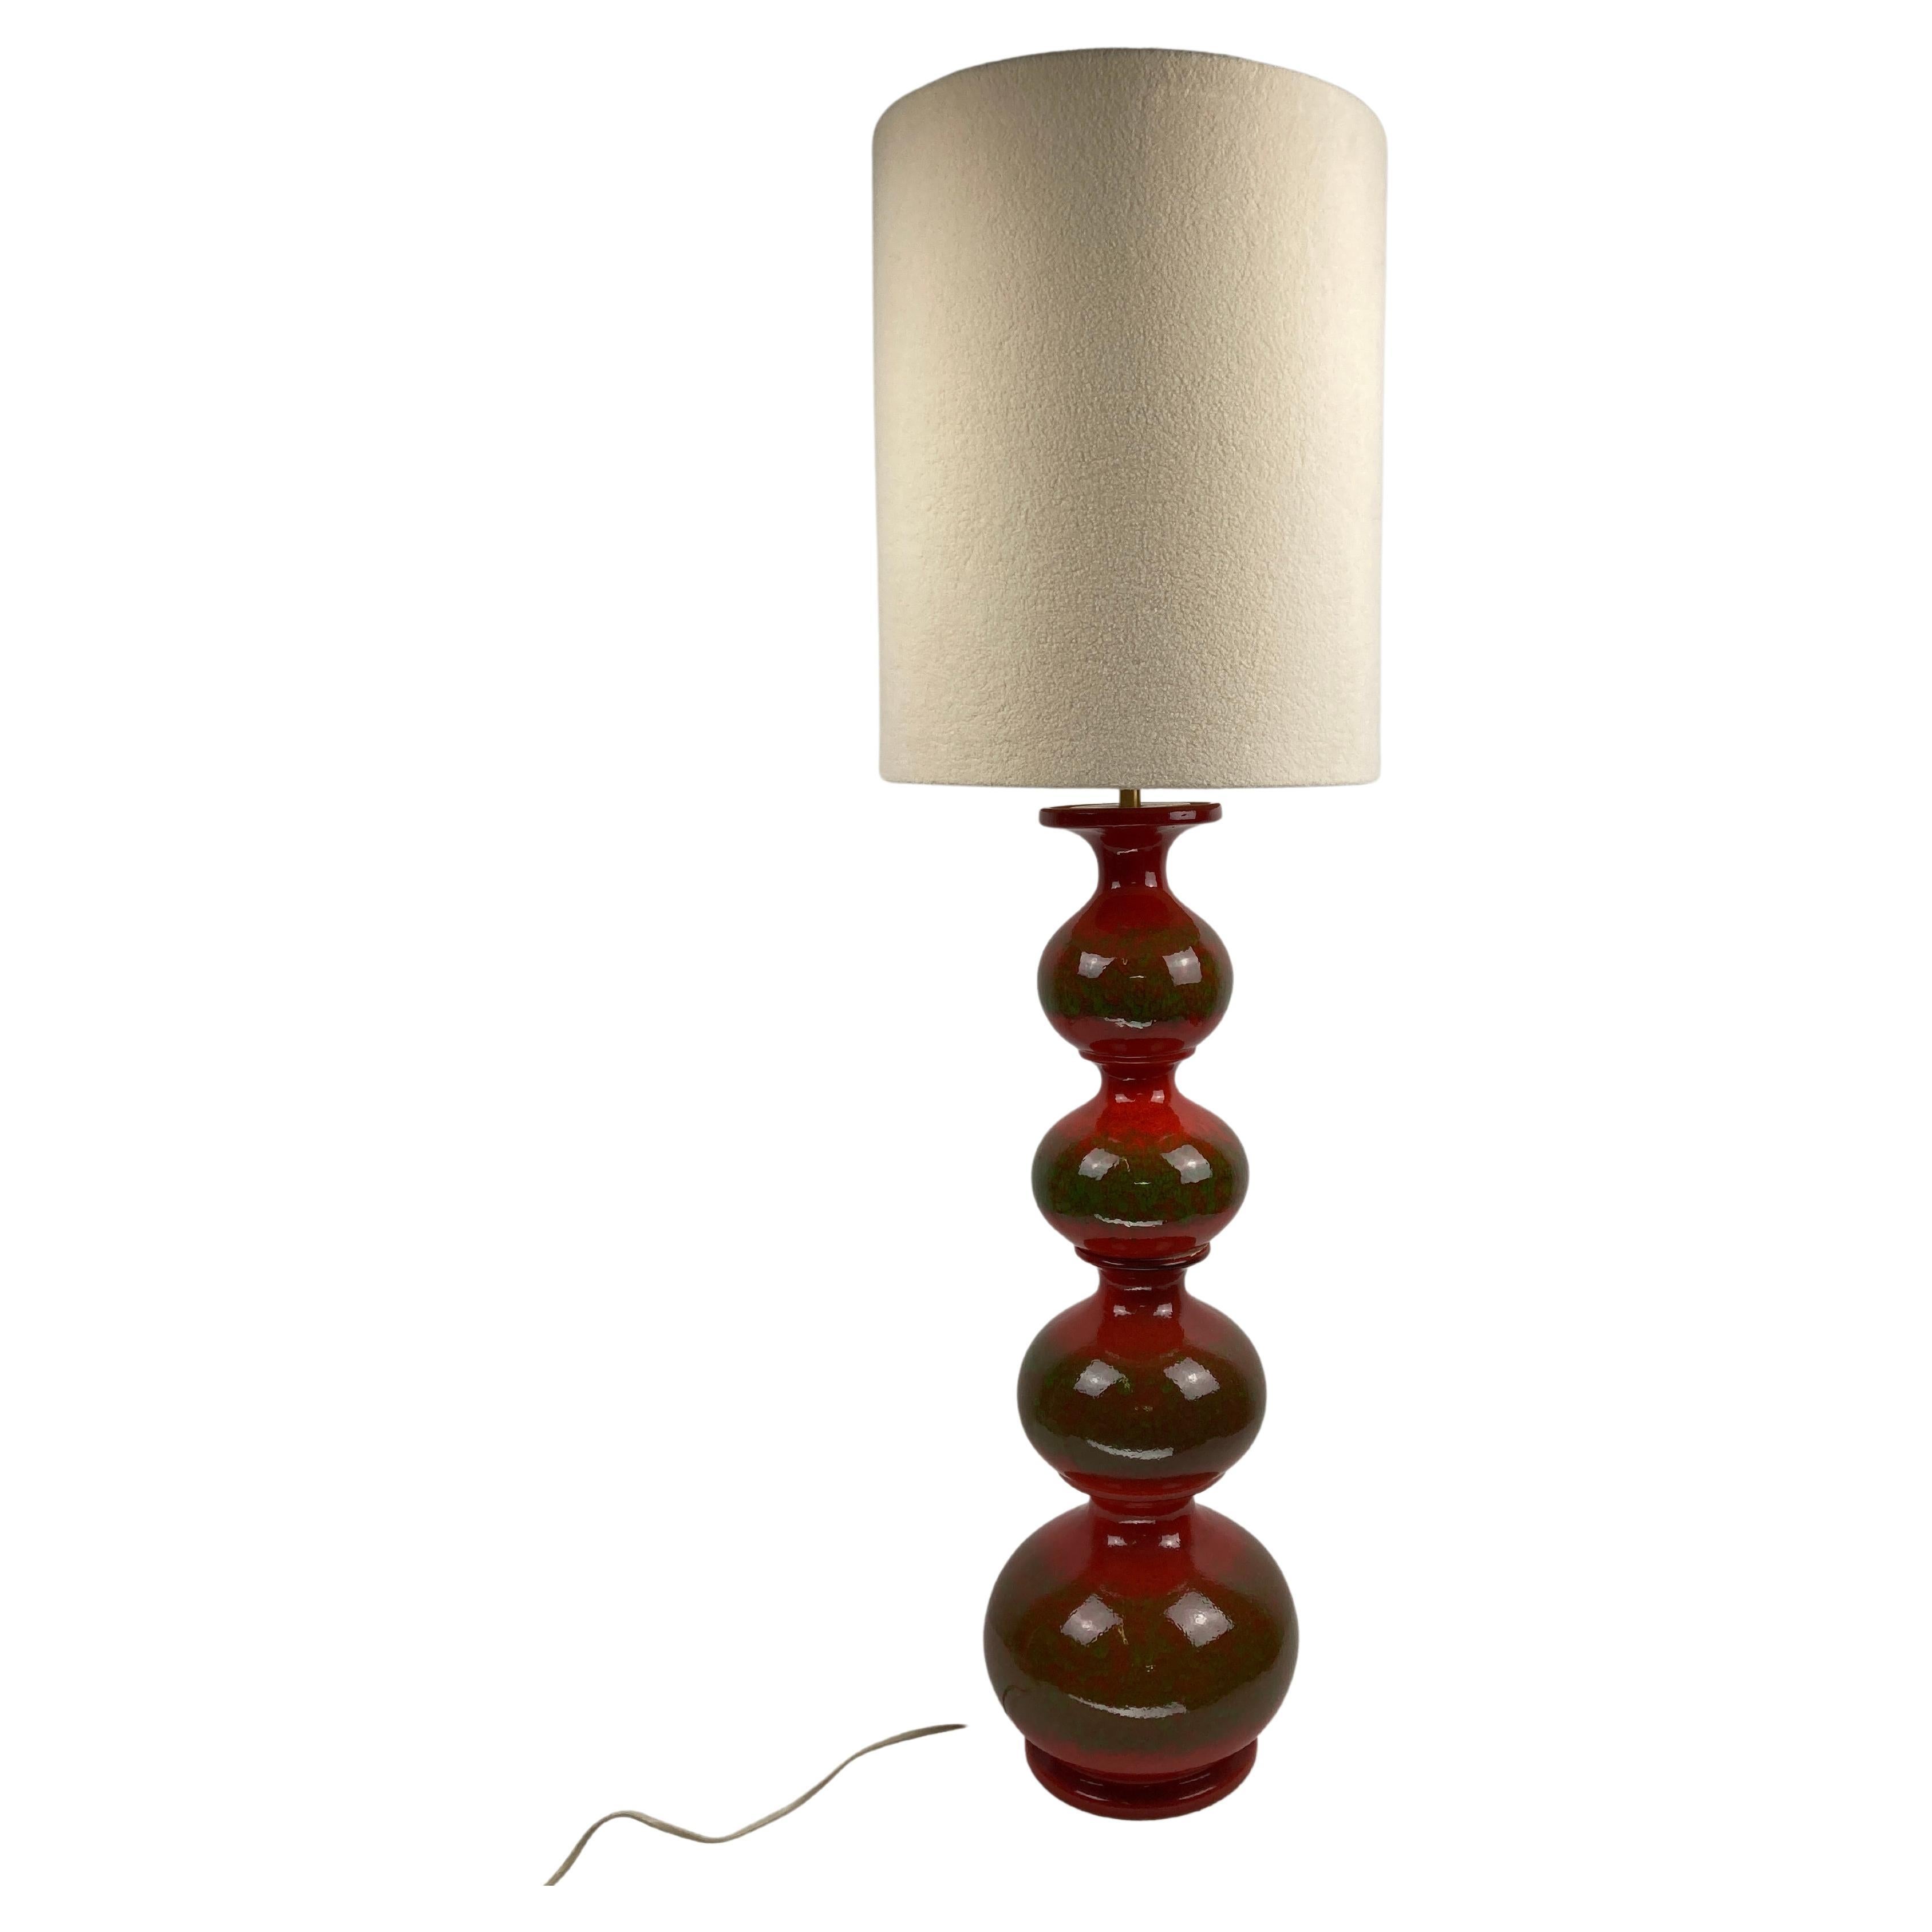 Ceramic bubbly wavy floor or table lamp by Kaiser Leuchten, 1960s For Sale